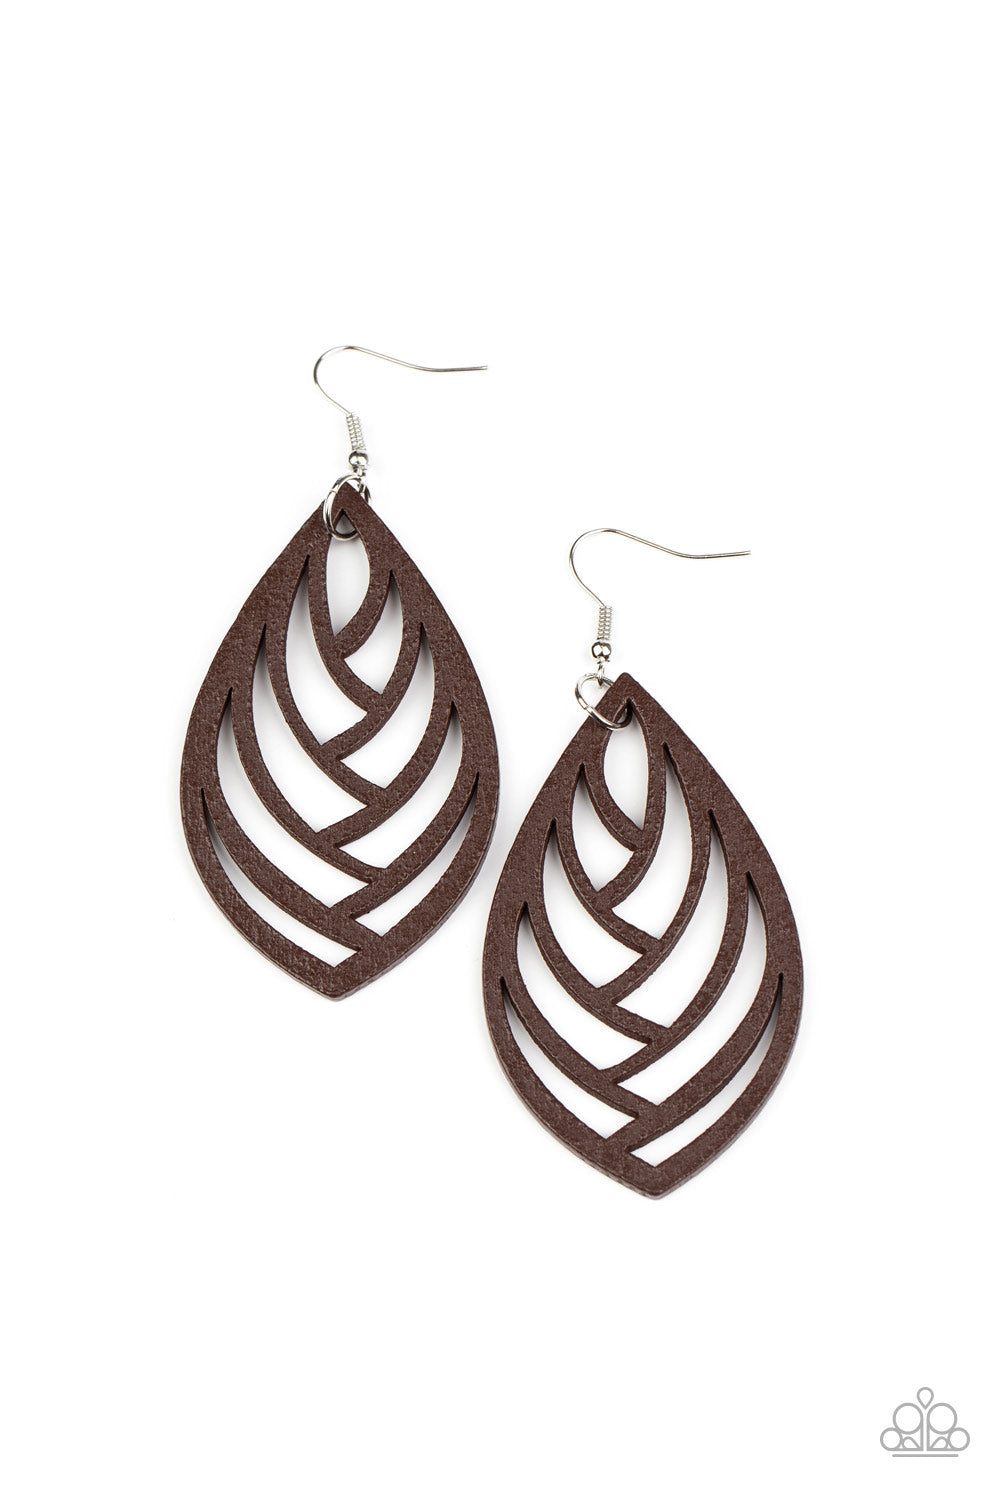 Out of the Woodwork - brown - Paparazzi earrings